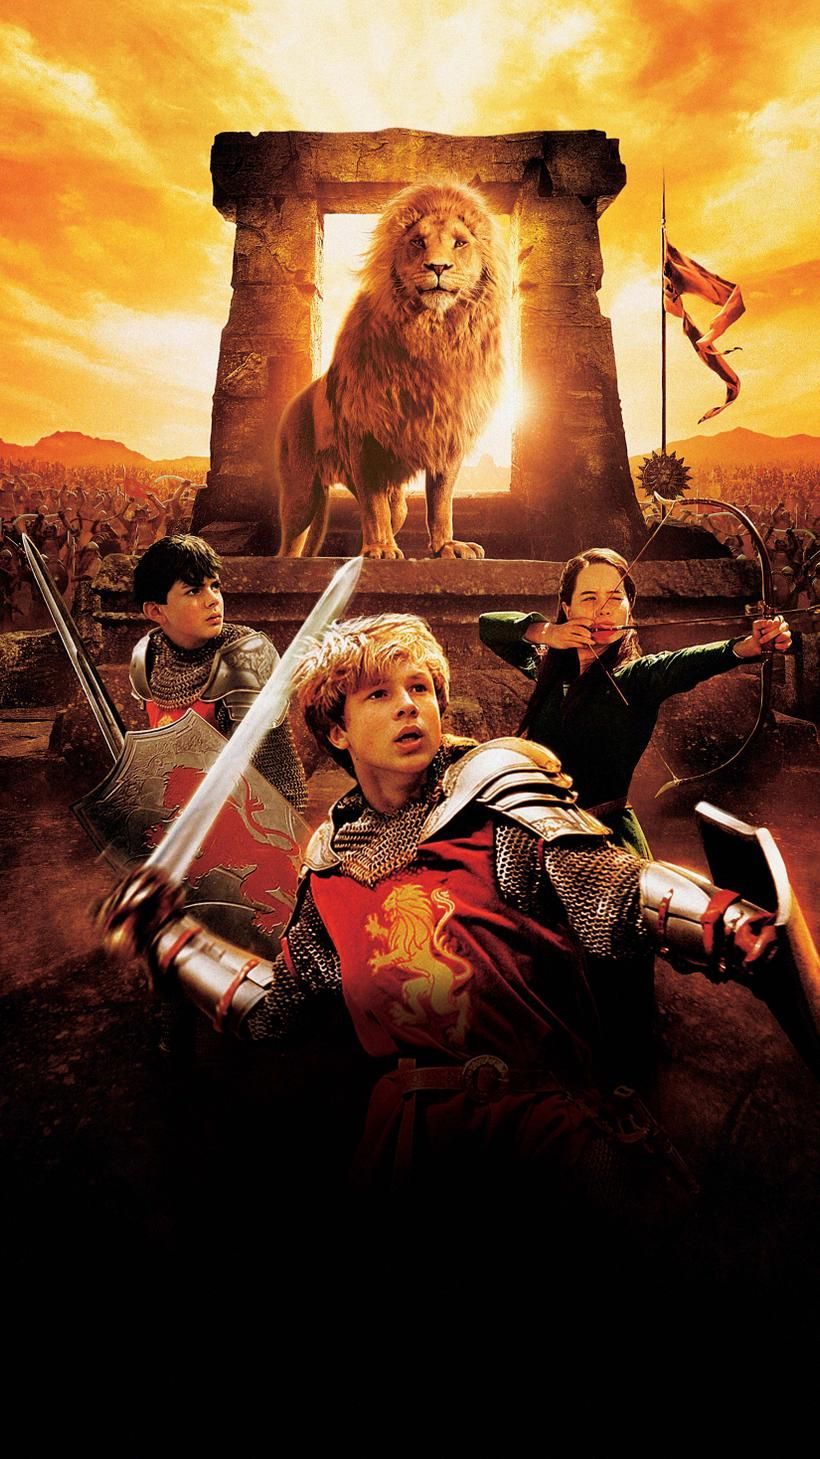 Harry Potter and the Philosopher's Stone (2001) Phone Wallpaper. Moviemania. Chronicles of narnia, Aslan narnia, Narnia